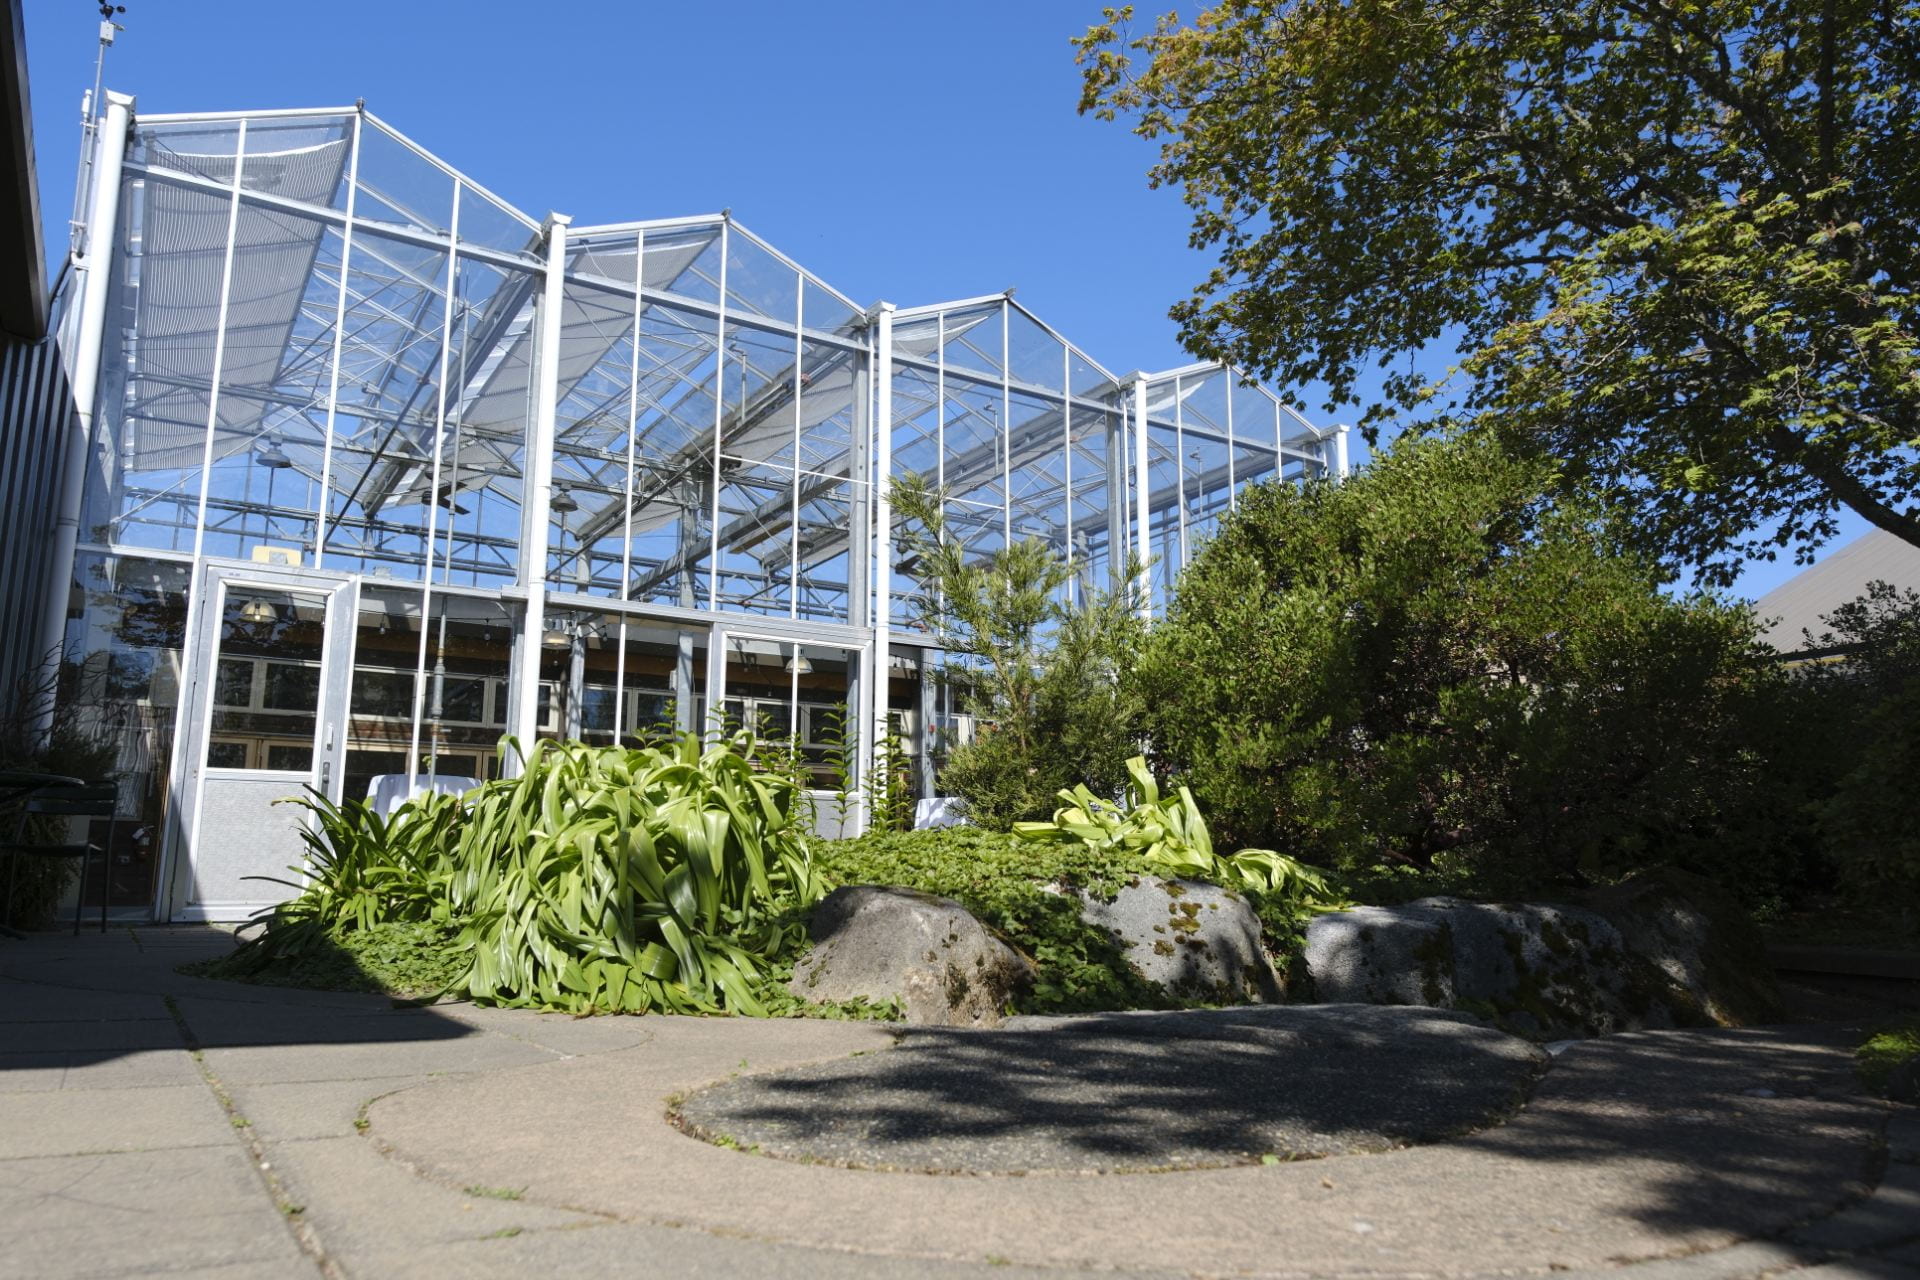 The Center for Urban Horticulture on a sunny day.